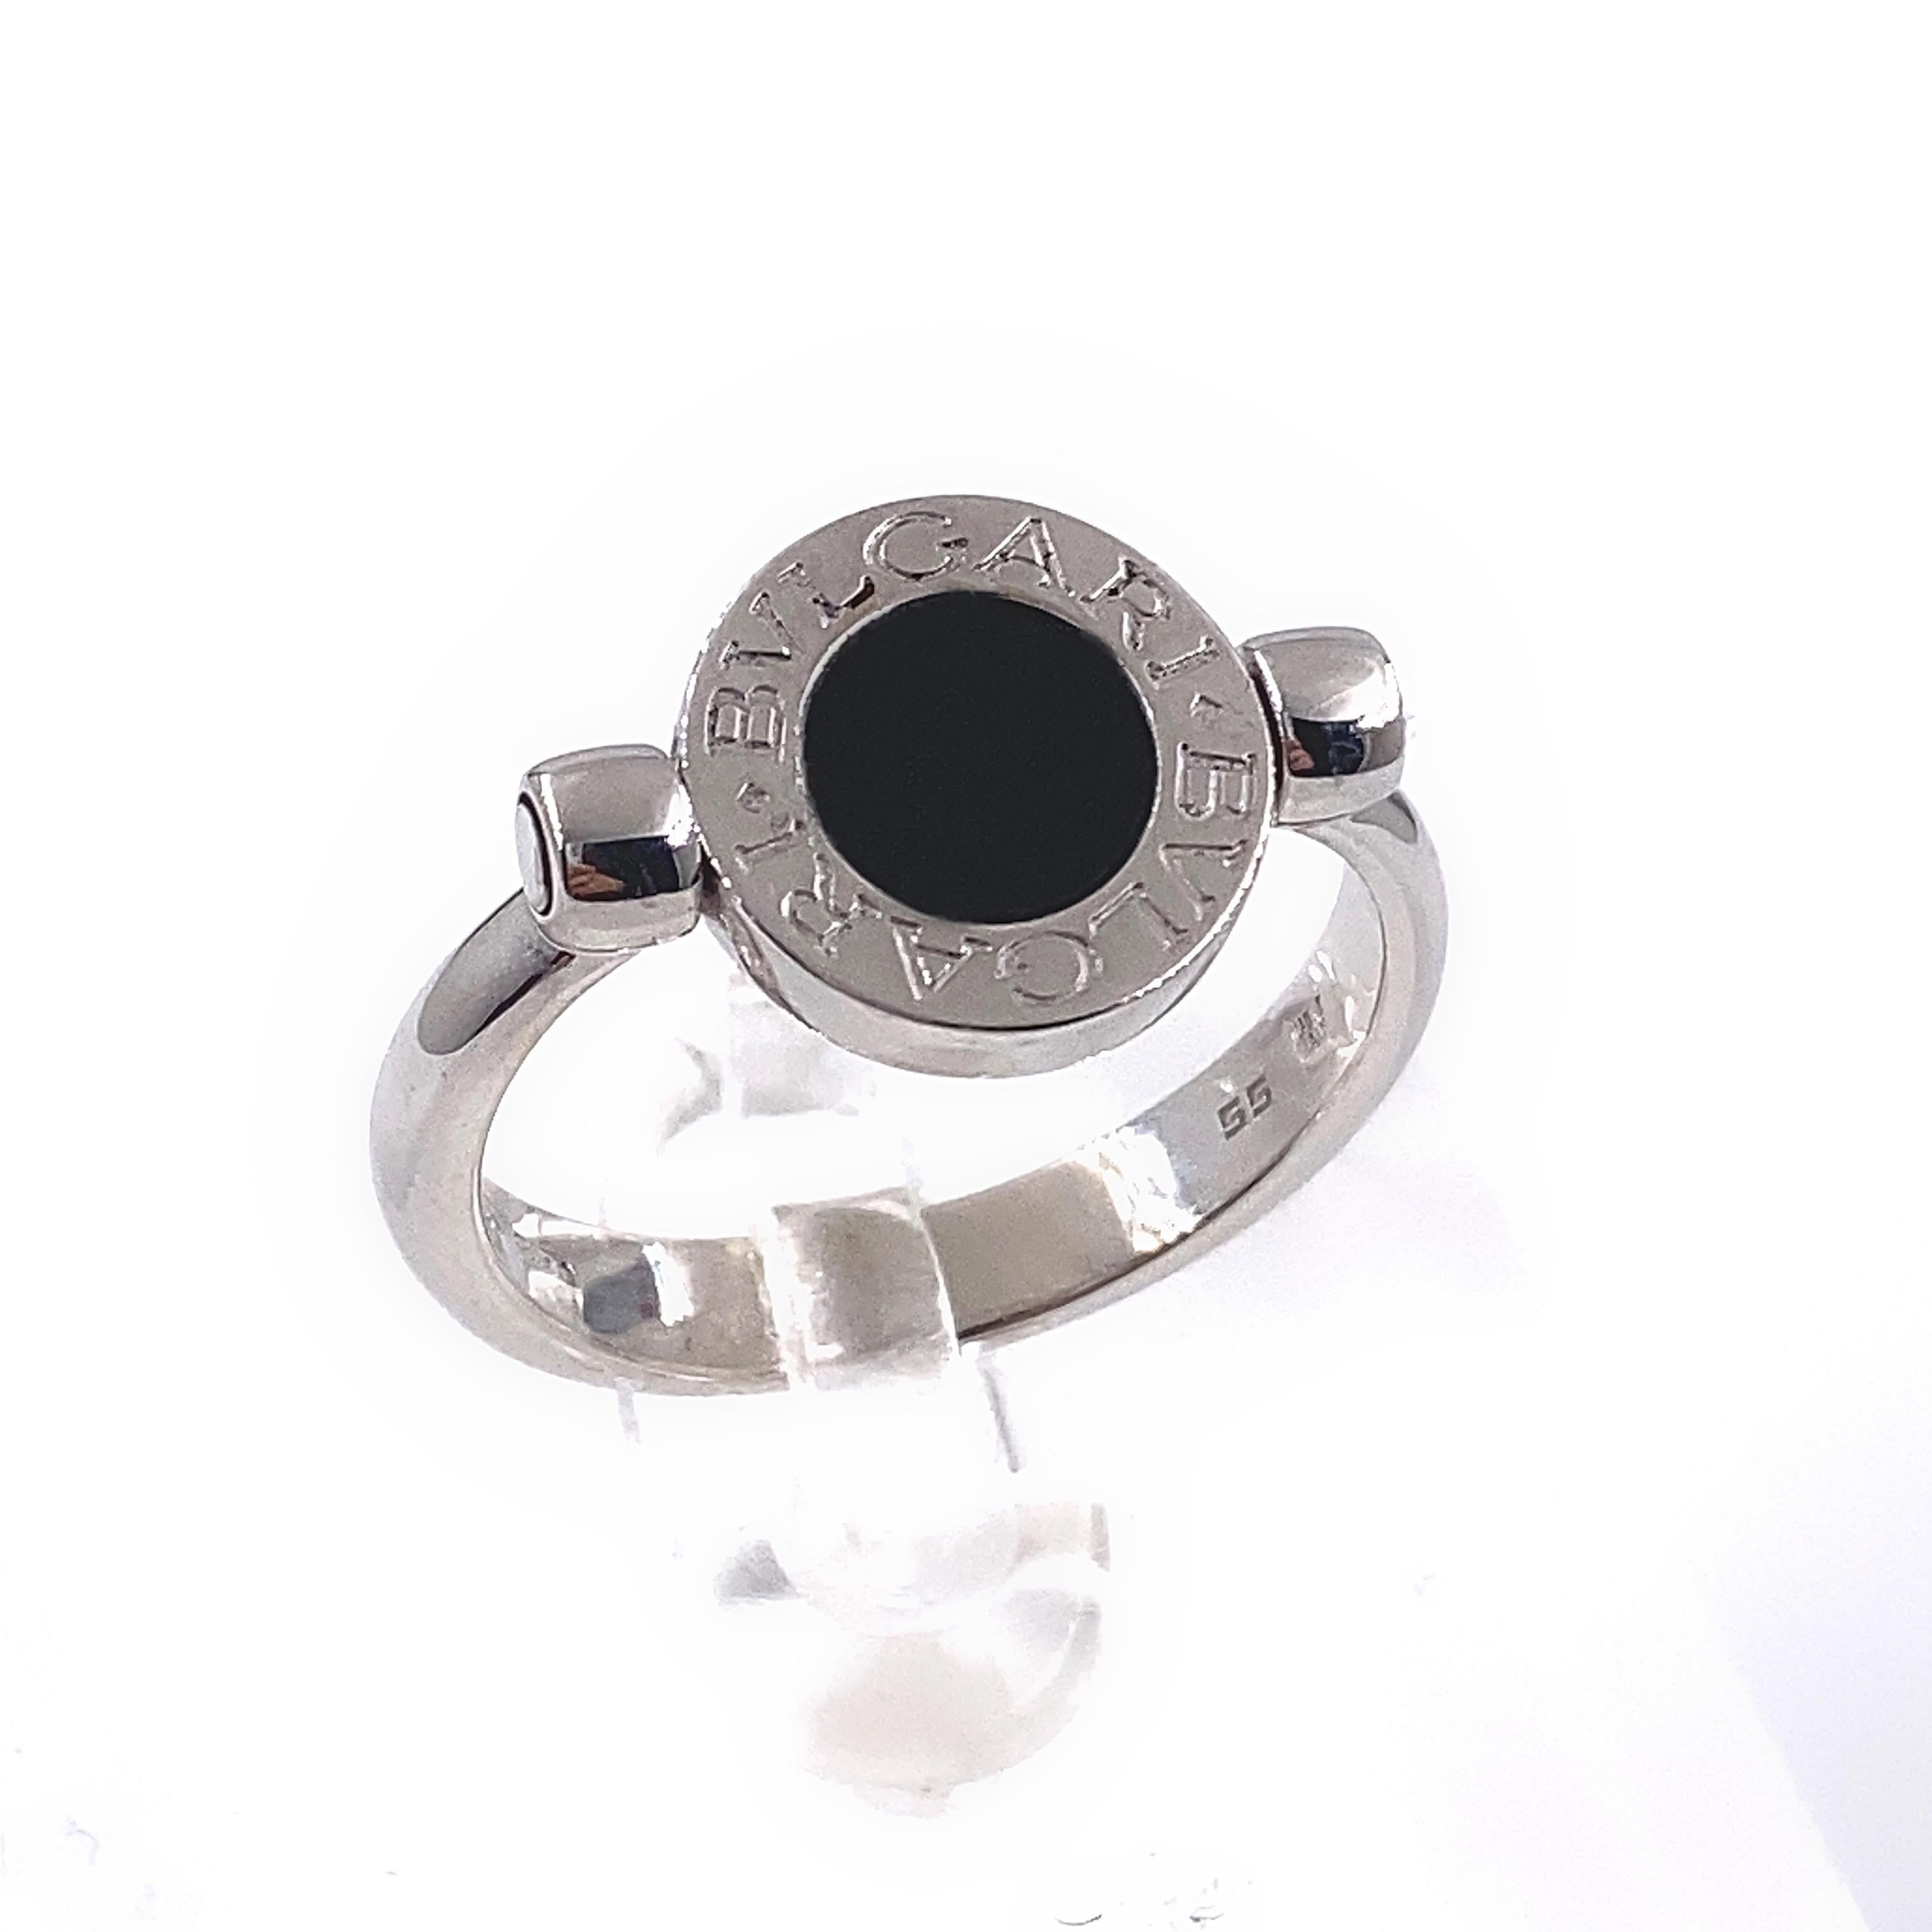 Women's or Men's Bvlgari White Gold Pave Diamond and Black Onyx Flip in 18kt Engagement Ring For Sale